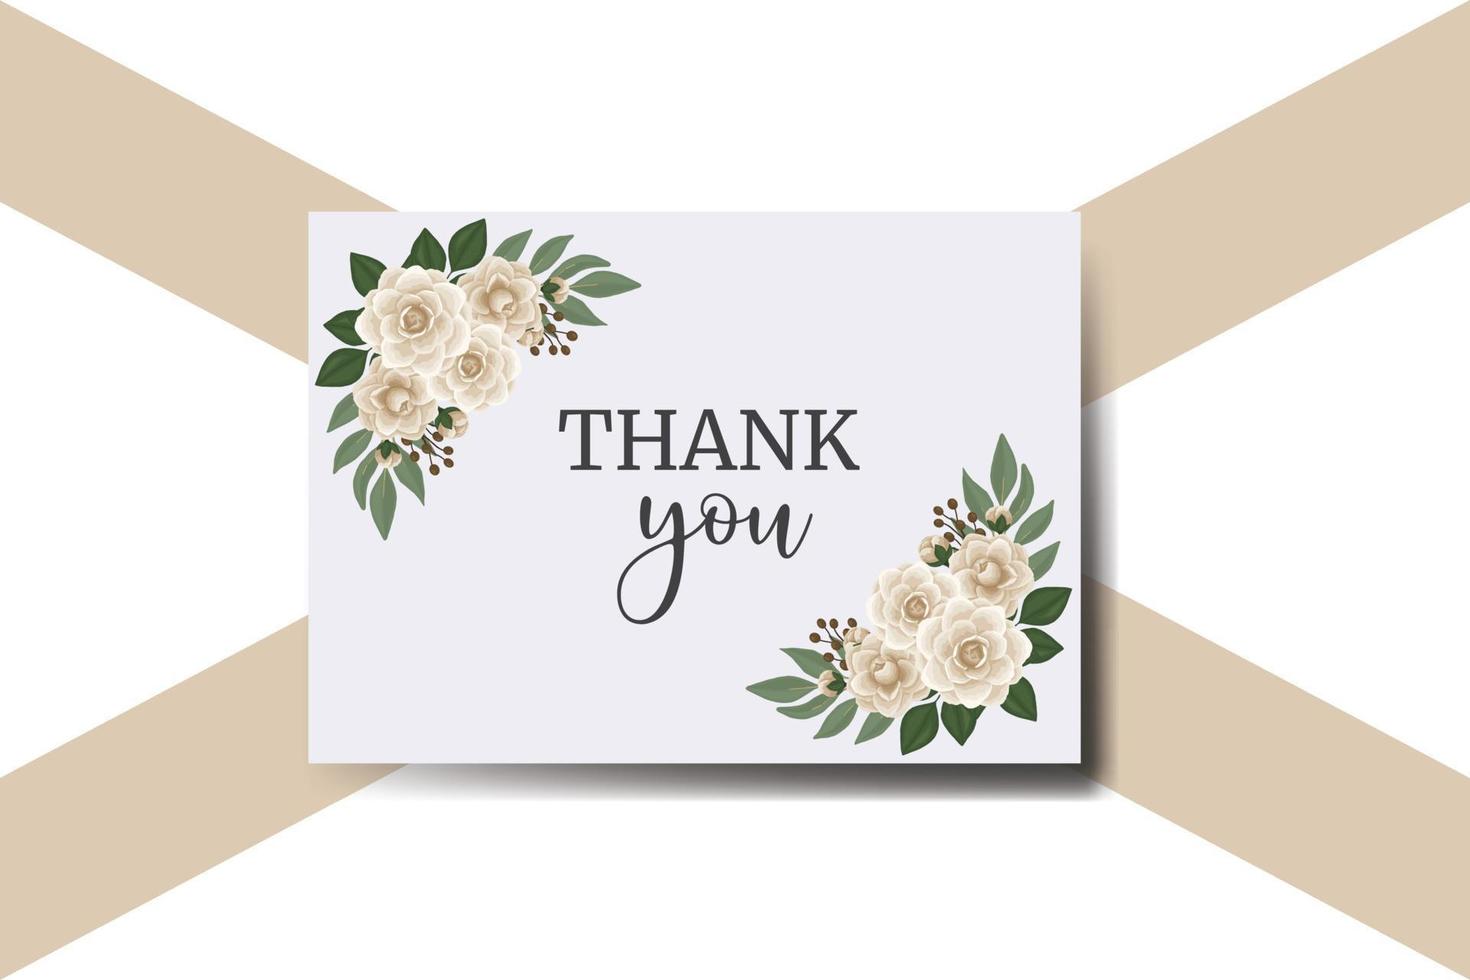 Thank you card Greeting Card Camellia flower Design Template vector